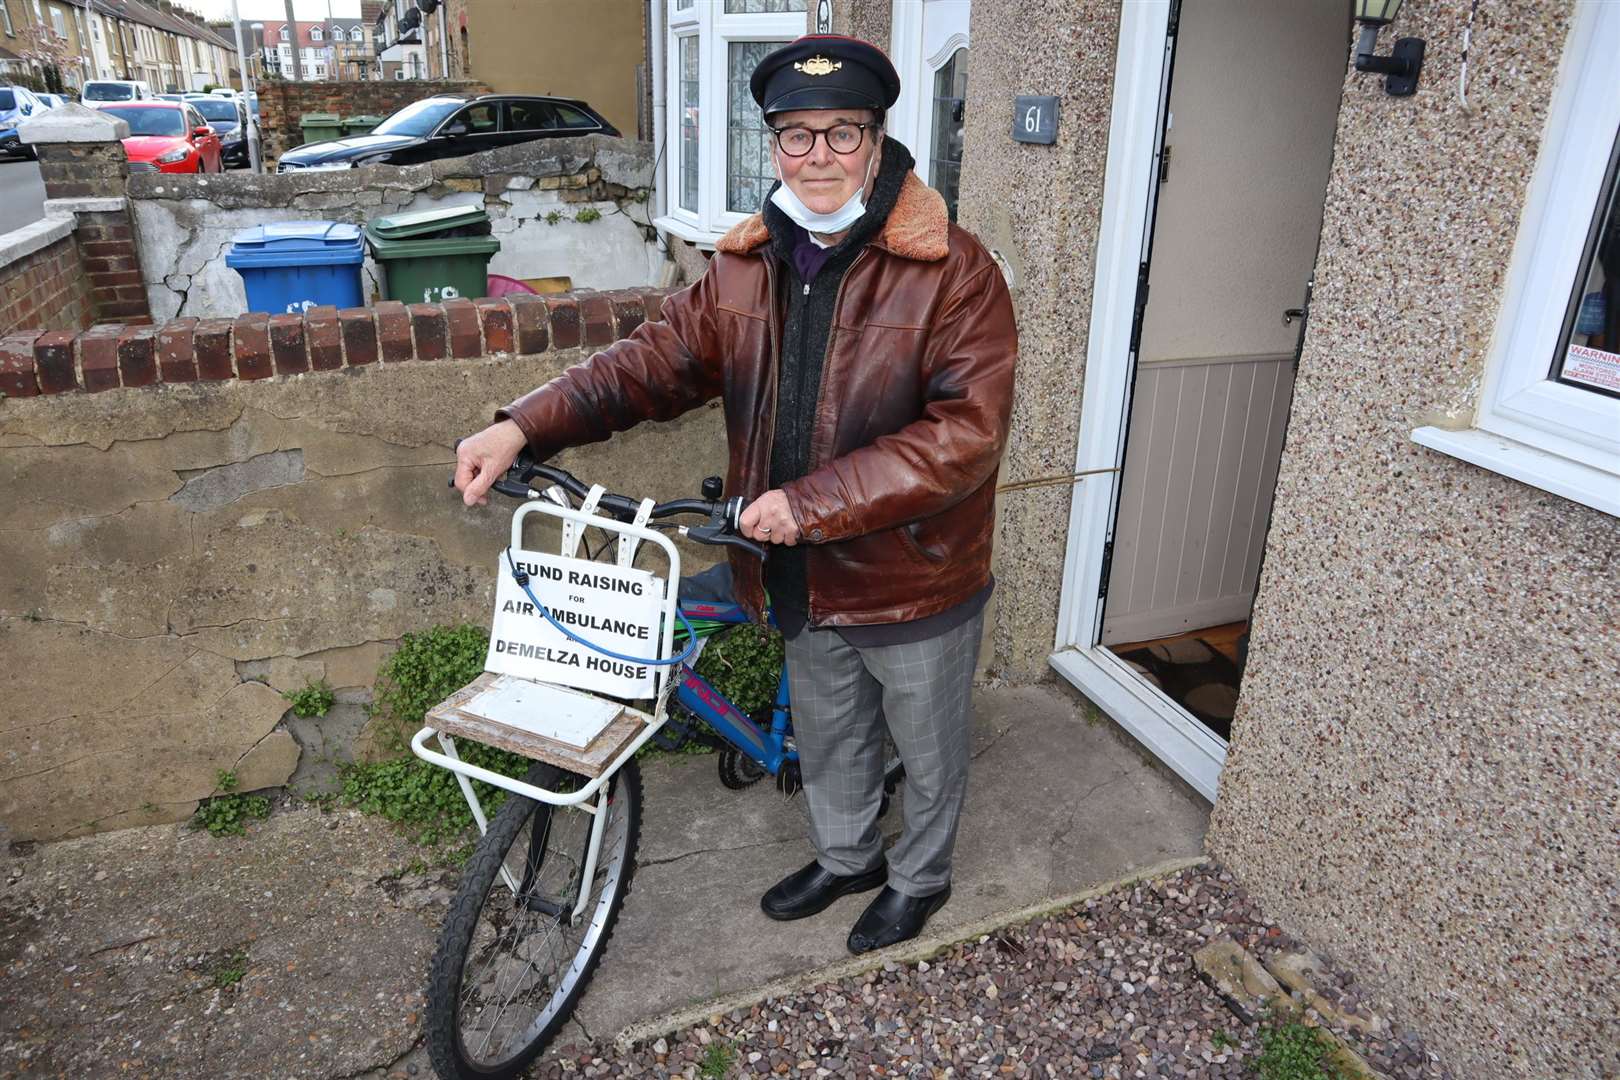 Whistling postman Dale Howting of Goodnestone Road, Sittingbourne, has had his morning's takings stolen from his bike